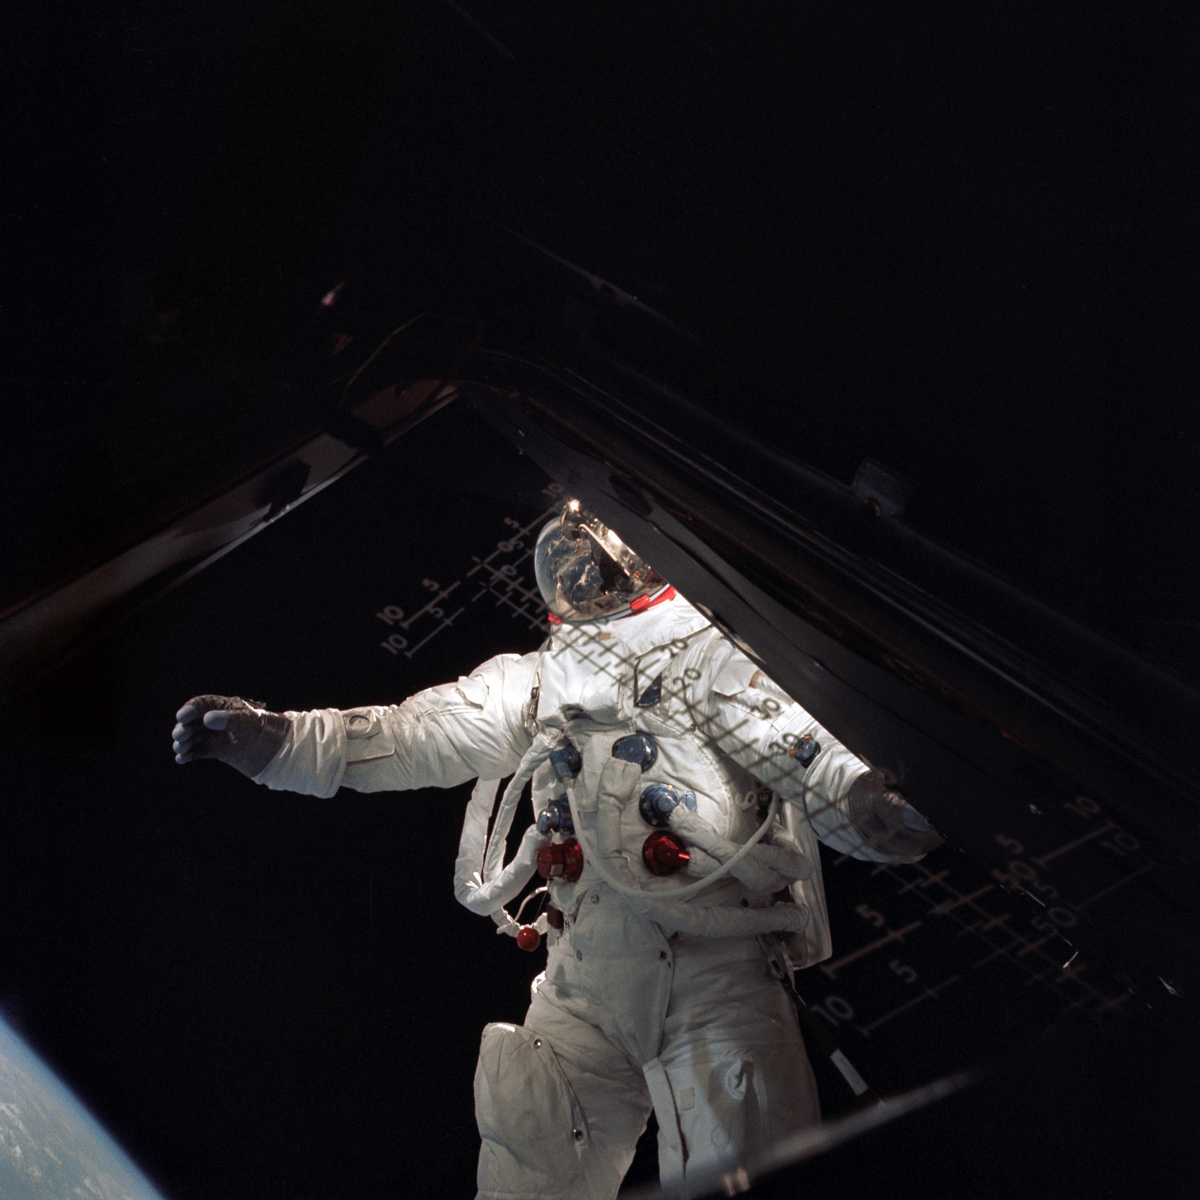 Astronaut in space, brightly lit against a black sky, seen through a spacecraft door.